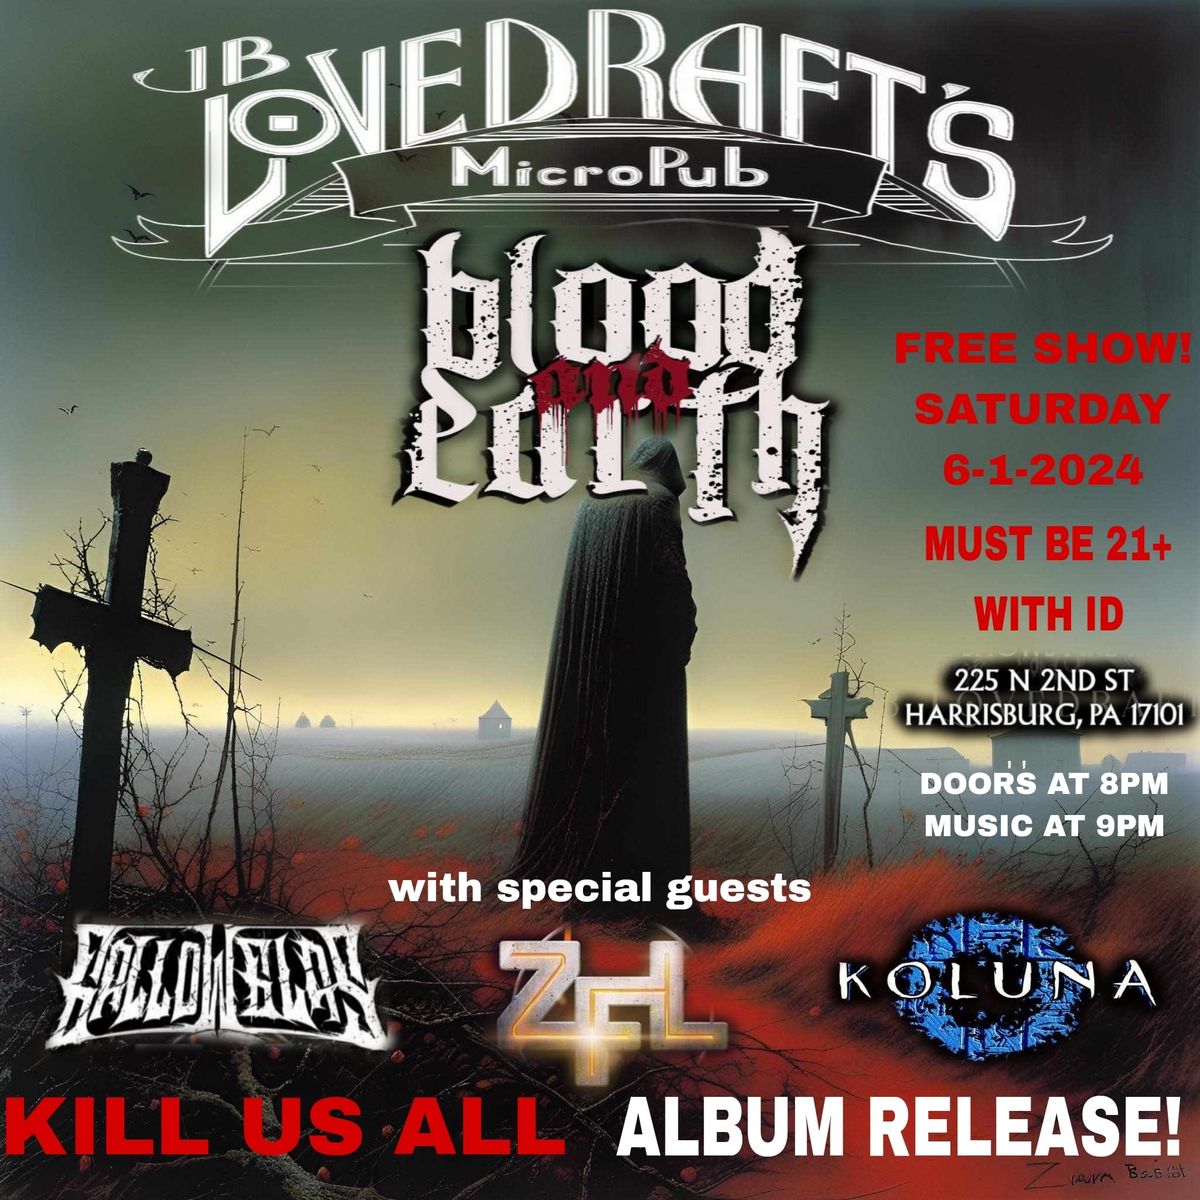 Blood and Earth Album Release!!!! with Gallowglas,ZFL and Koluna LIVE @ Jb Lovedraft's MicroPub 